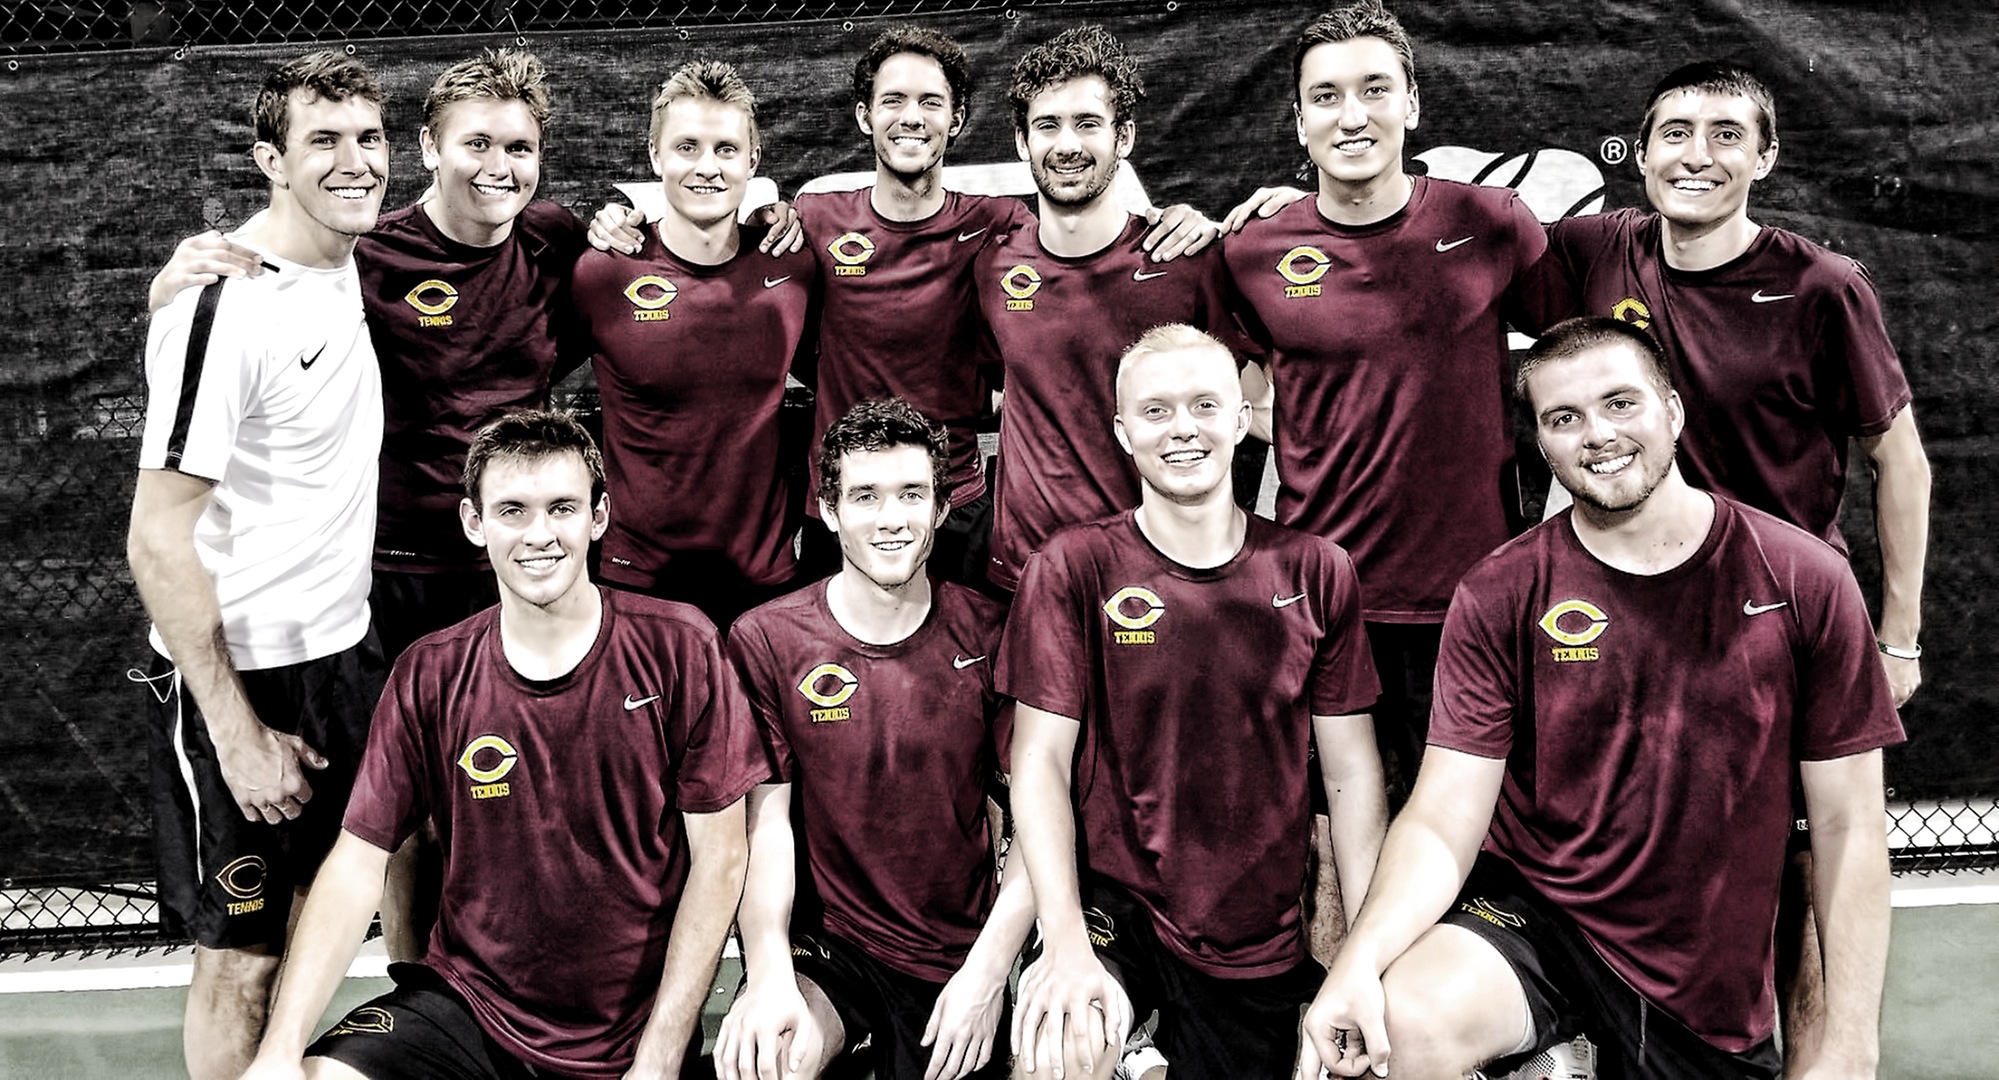 The Cobbers won the first match of their spring break trip and ended it with a clutch conference win over Bethel.